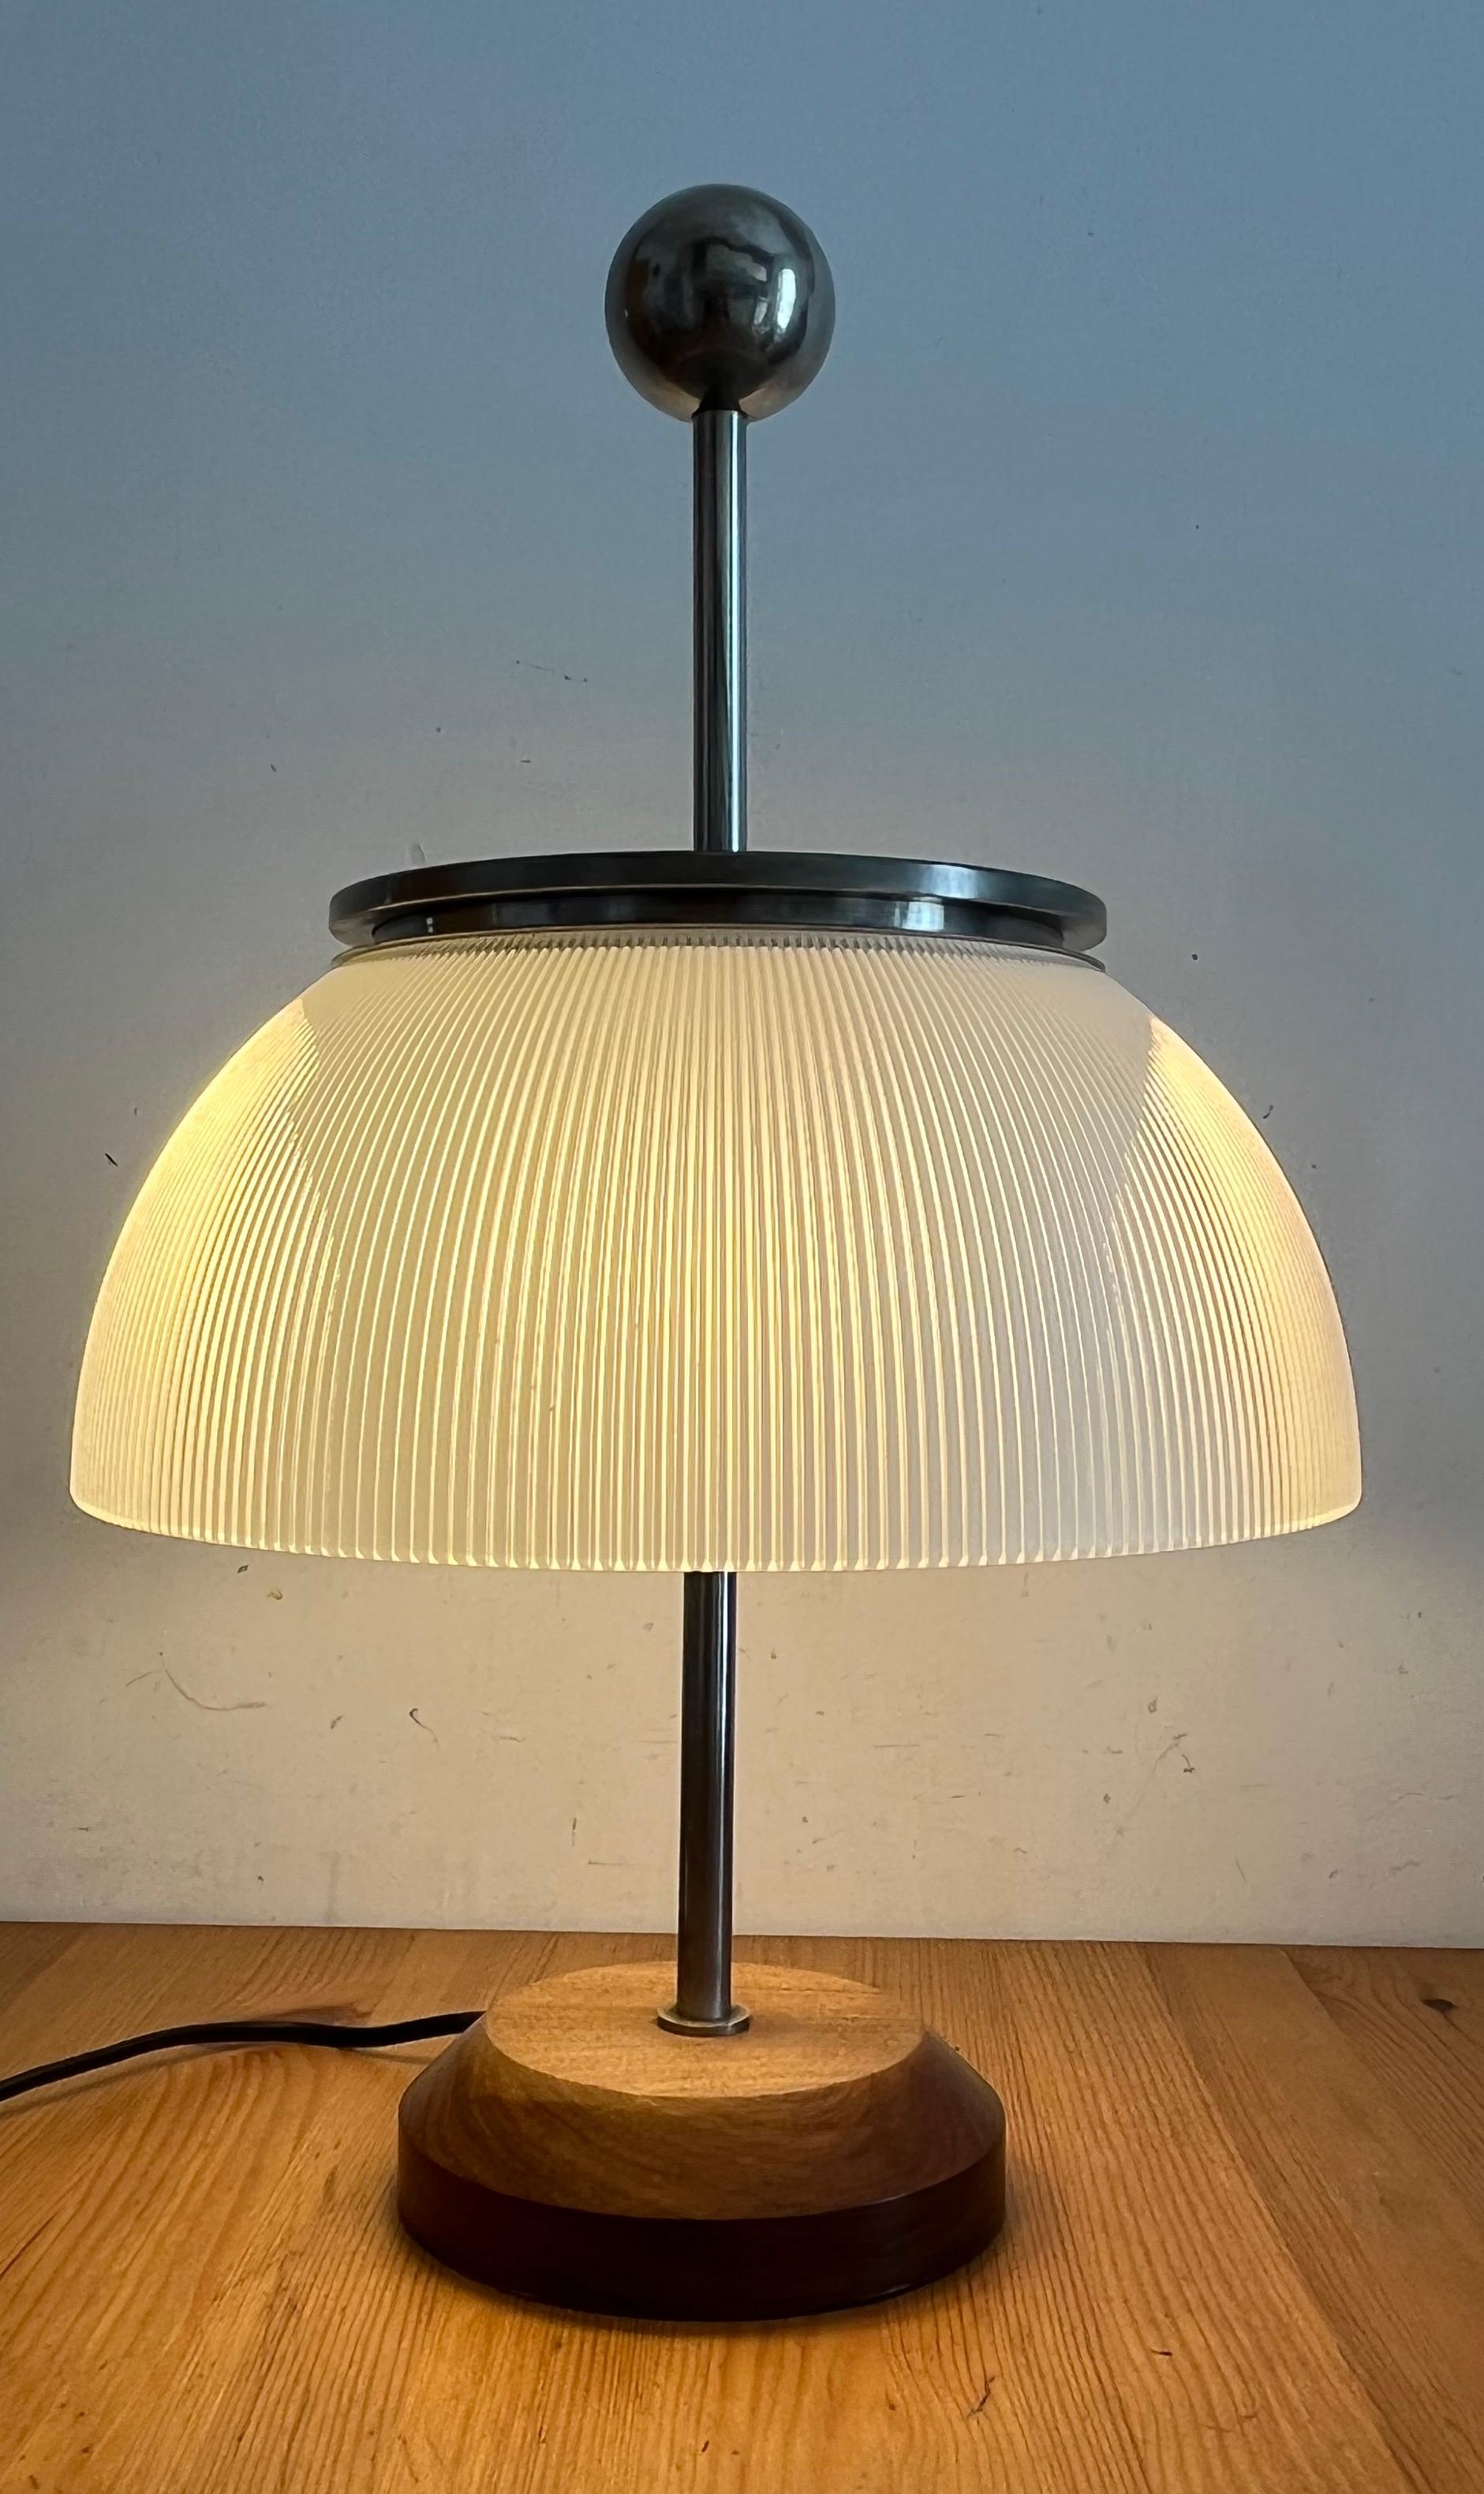 The Alfa table lamp is a lamp that appears in stark contrast to the cold rationalist design in vogue in the 60s. It is a 1959 project by designer Sergio Mazza, which takes up the traditional typology of the abate-jour, using the worked crystal to